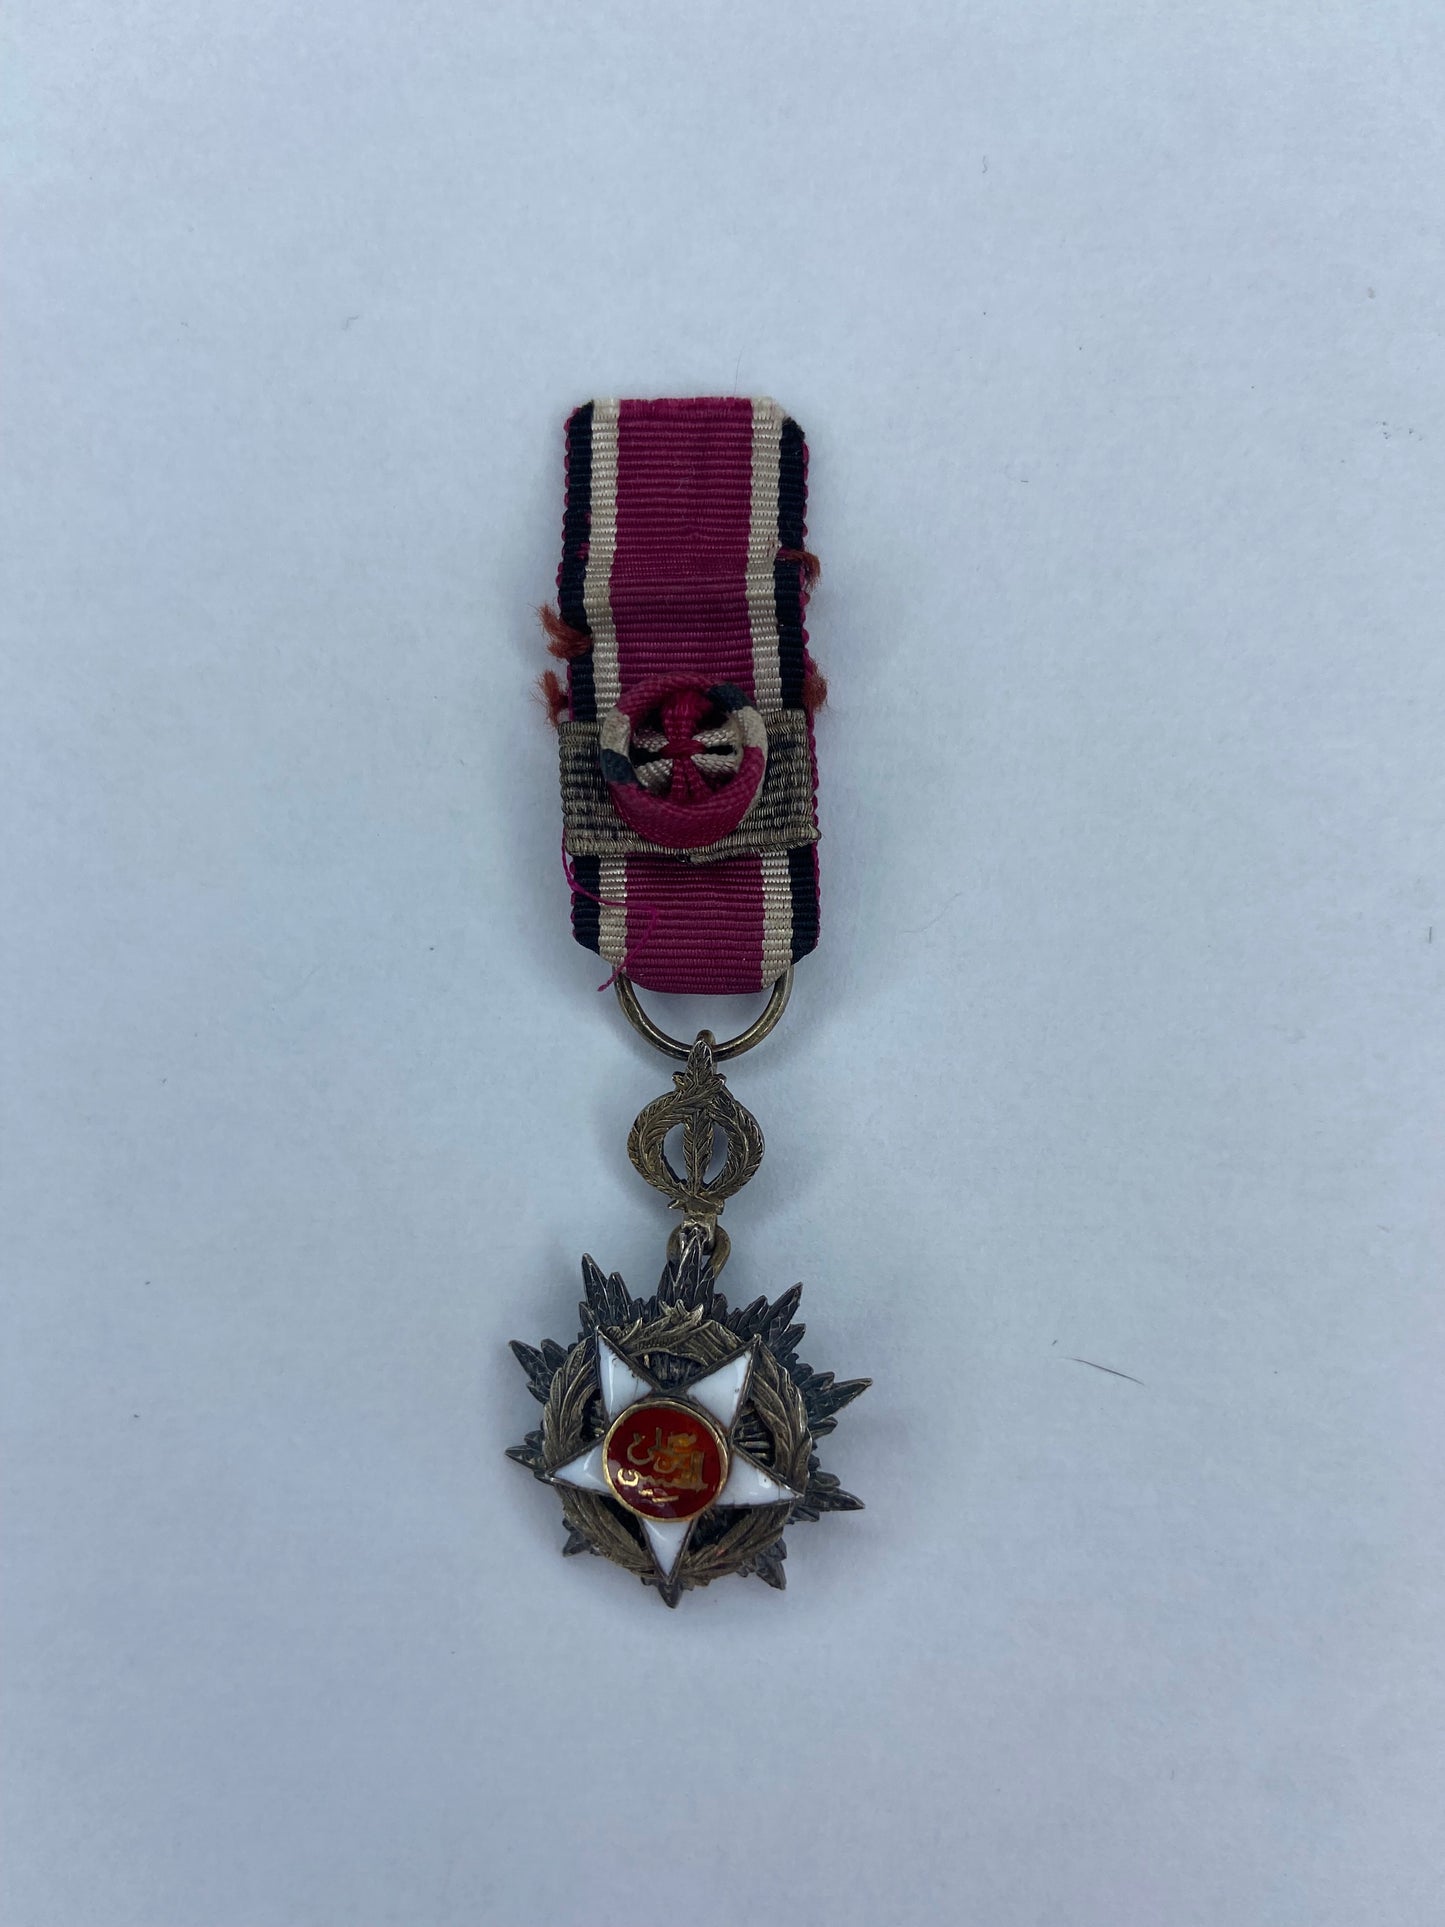 EGYPT ORDER OF THE INDEPENDENCE GRAND OFFICER GRADE MINIATURE. SILVER/MARKED. RARE!